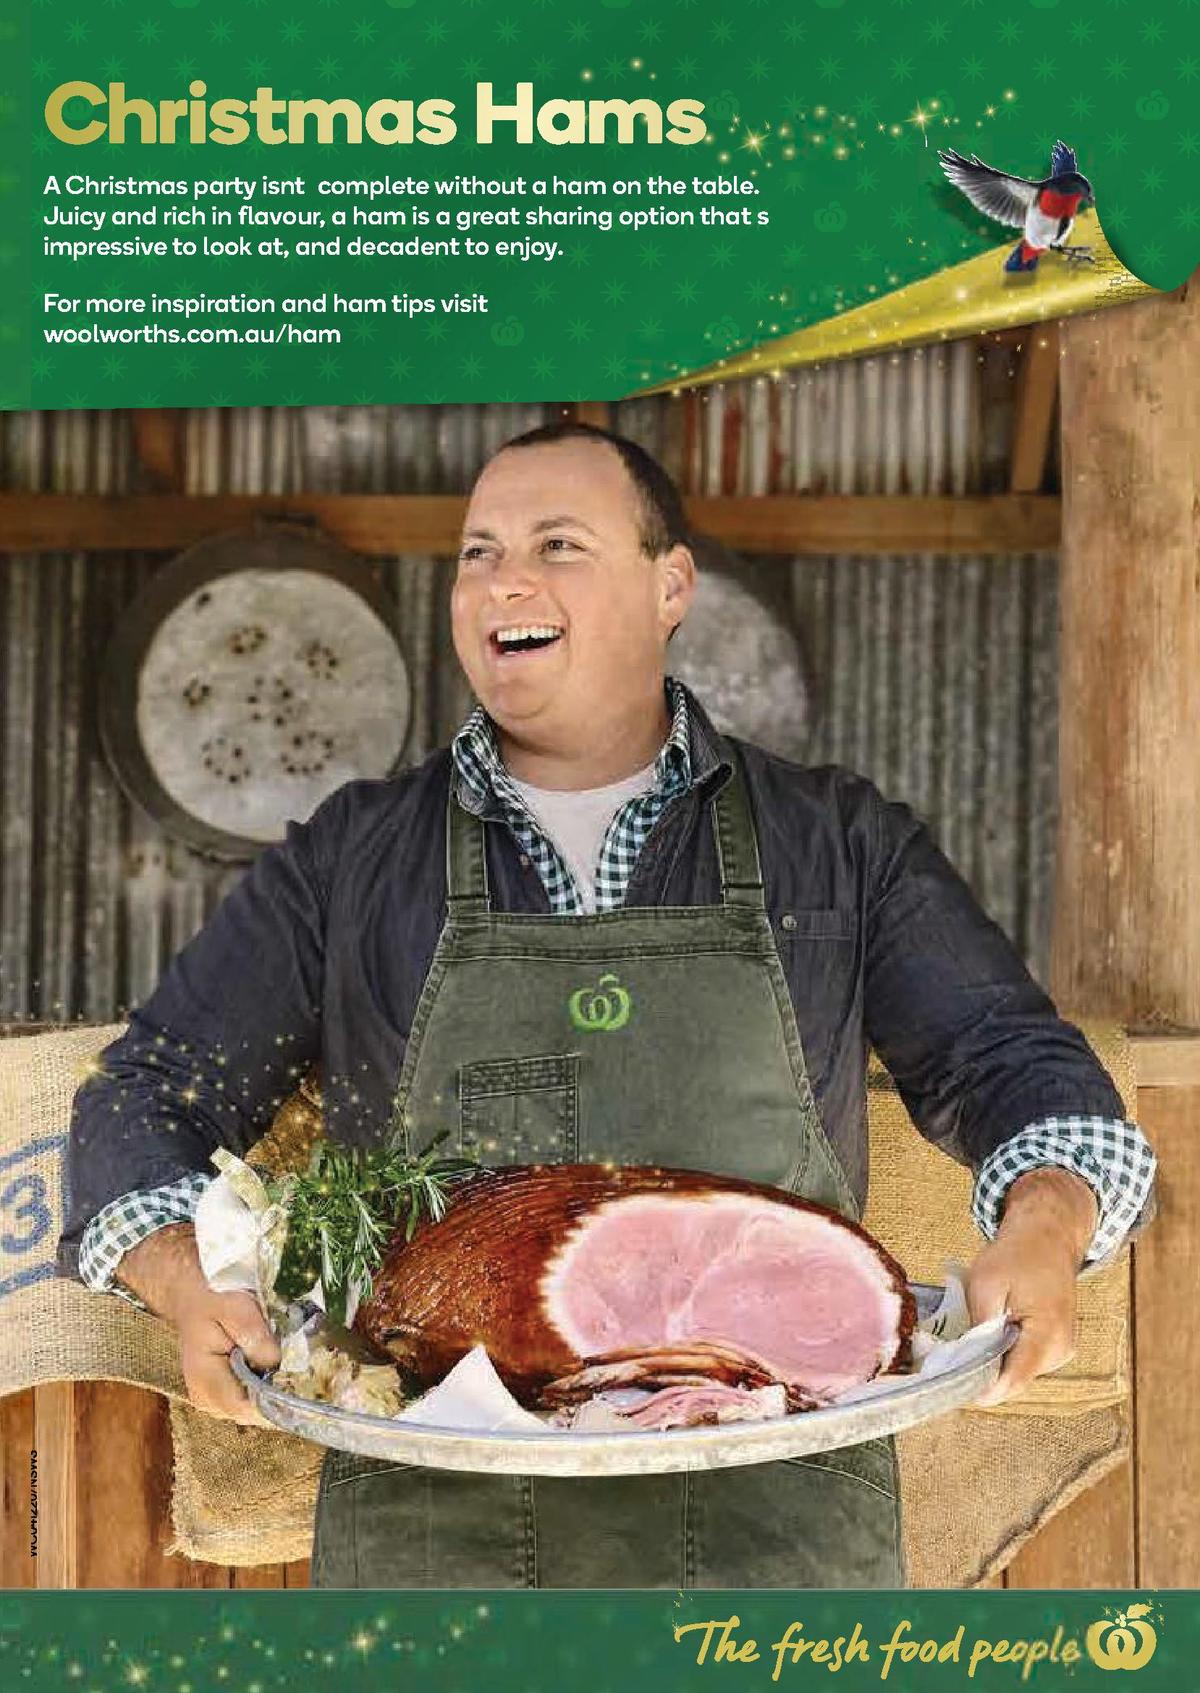 Woolworths Catalogues from 4 December